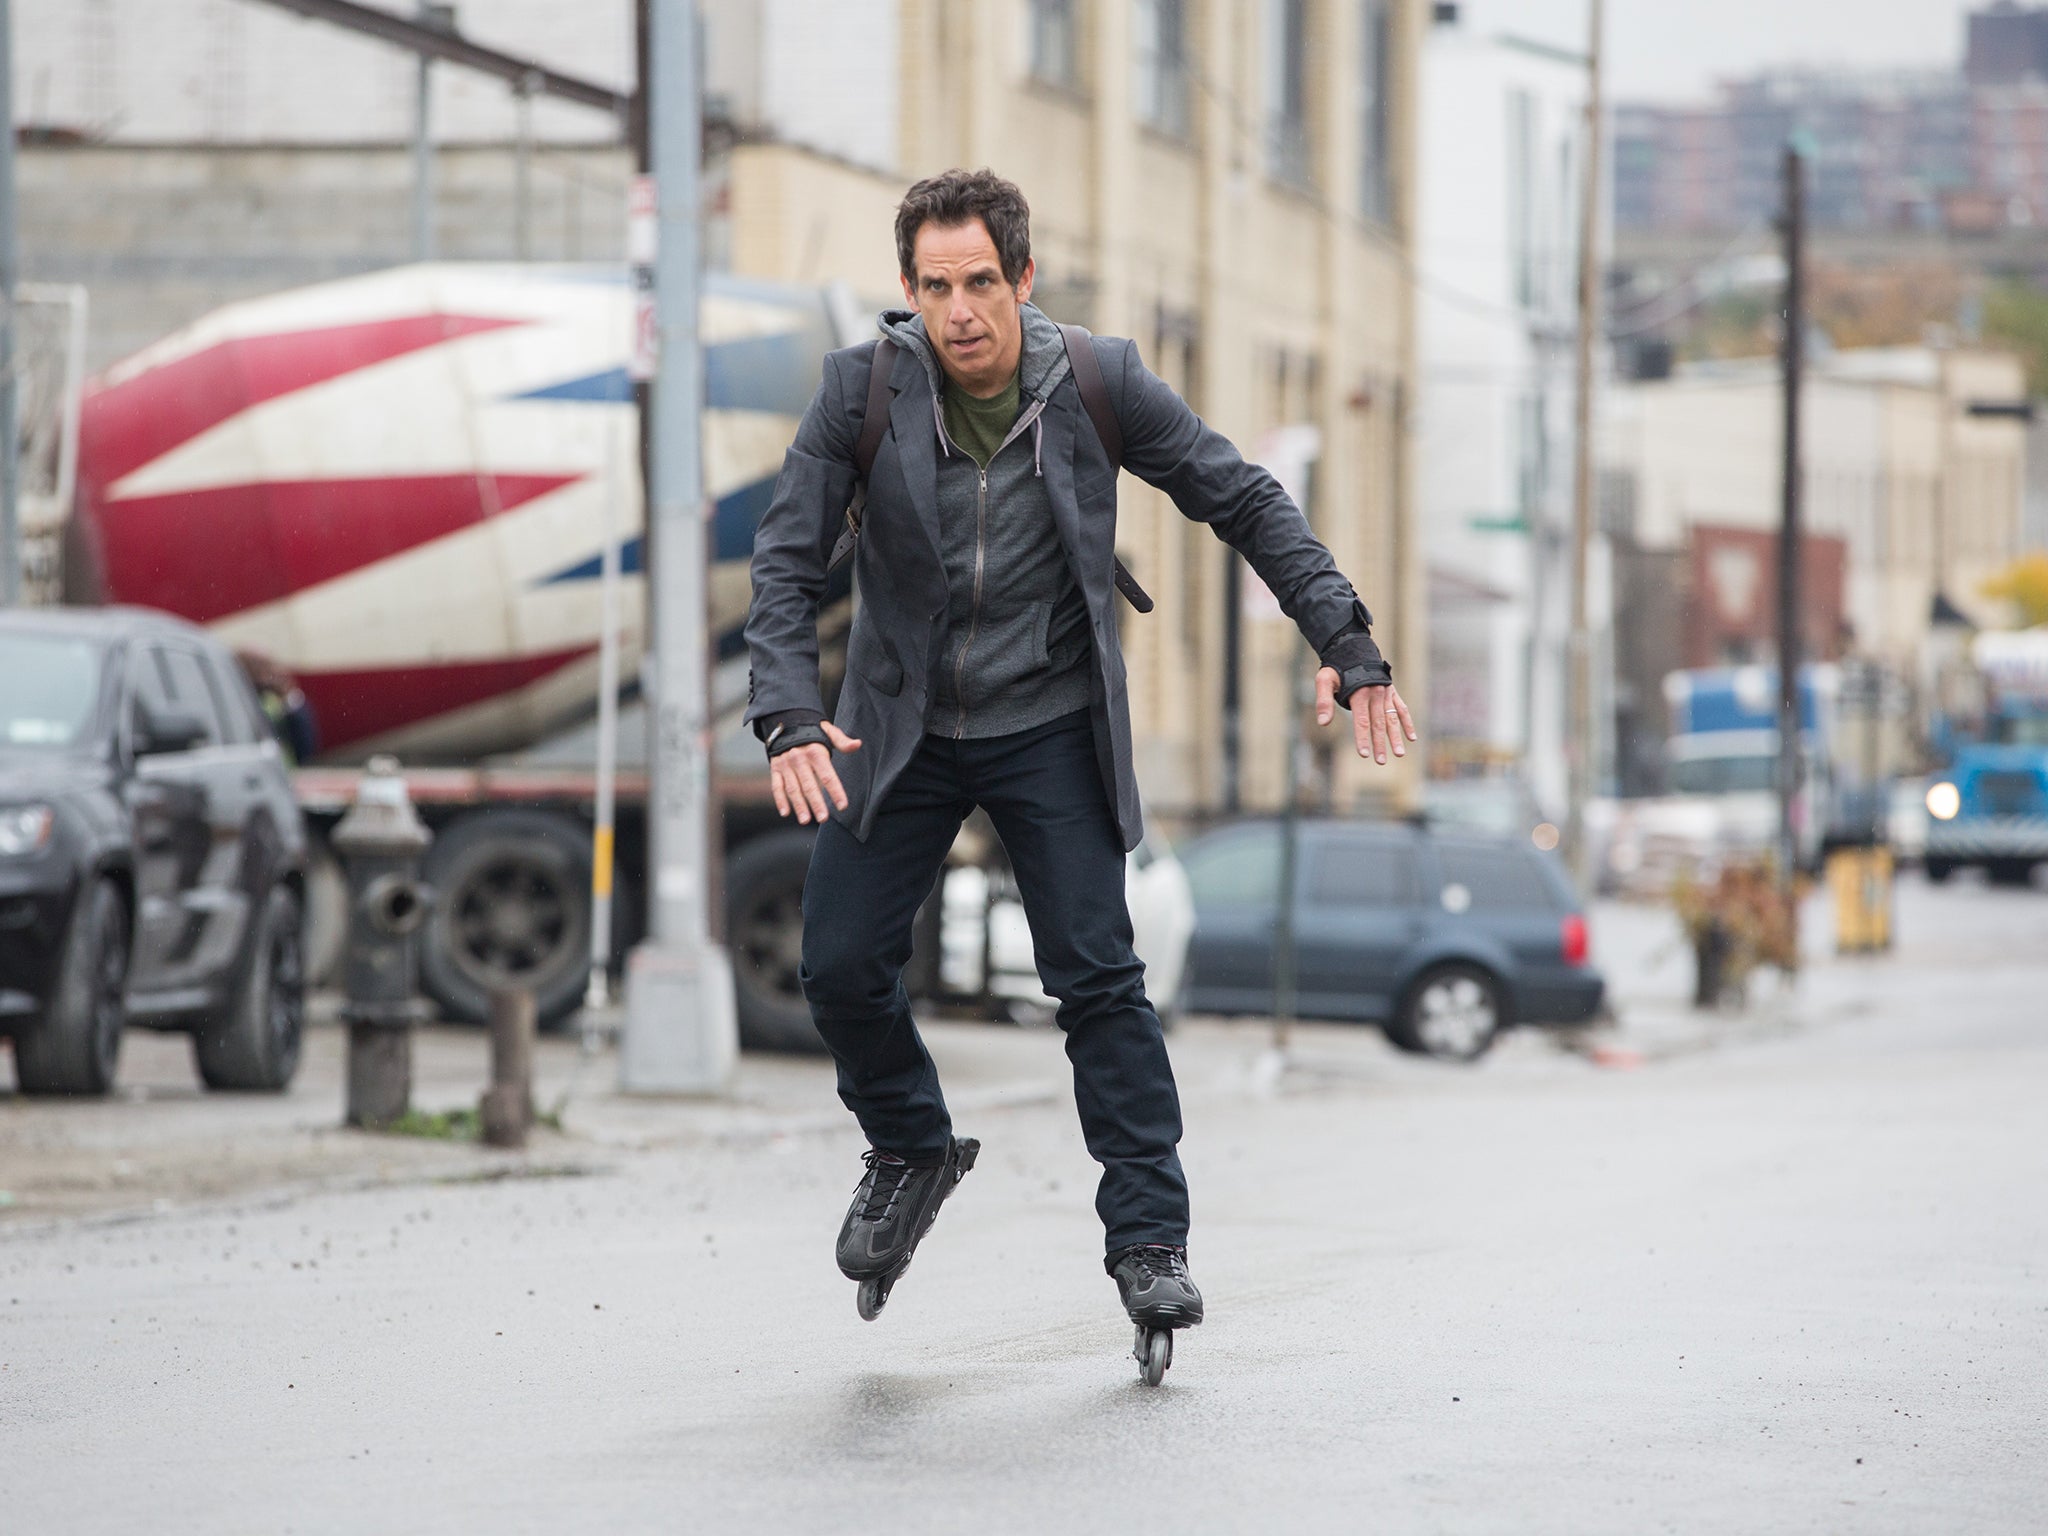 Race against time: Ben Stiller in ‘While We’re Young’